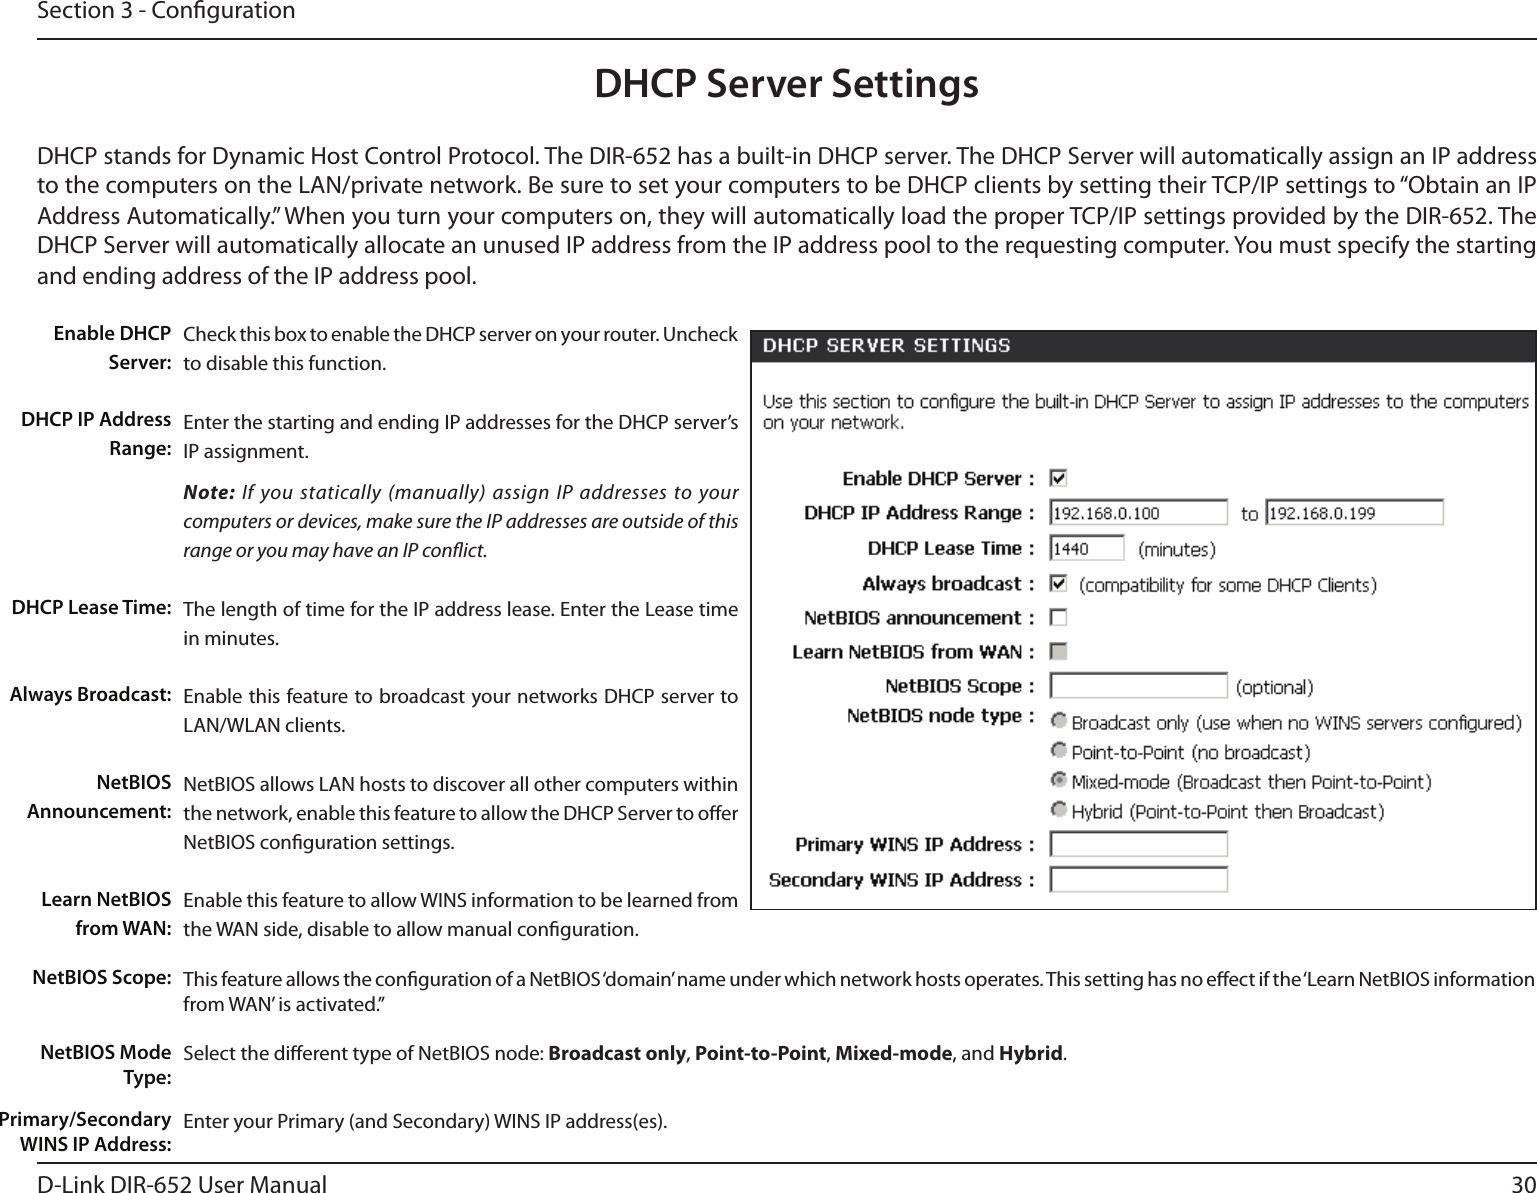 30D-Link DIR-652 User ManualSection 3 - CongurationDHCP Server SettingsDHCP stands for Dynamic Host Control Protocol. The DIR-652 has a built-in DHCP server. The DHCP Server will automatically assign an IP address to the computers on the LAN/private network. Be sure to set your computers to be DHCP clients by setting their TCP/IP settings to “Obtain an IP Address Automatically.” When you turn your computers on, they will automatically load the proper TCP/IP settings provided by the DIR-652. The DHCP Server will automatically allocate an unused IP address from the IP address pool to the requesting computer. You must specify the starting and ending address of the IP address pool.Check this box to enable the DHCP server on your router. Uncheck to disable this function.Enter the starting and ending IP addresses for the DHCP server’s IP assignment.Note: If you statically (manually) assign IP addresses to your computers or devices, make sure the IP addresses are outside of this range or you may have an IP conict. The length of time for the IP address lease. Enter the Lease time in minutes.Enable this feature to broadcast your networks DHCP server to LAN/WLAN clients.NetBIOS allows LAN hosts to discover all other computers within the network, enable this feature to allow the DHCP Server to oer NetBIOS conguration settings.Enable this feature to allow WINS information to be learned from the WAN side, disable to allow manual conguration.This feature allows the conguration of a NetBIOS ‘domain’ name under which network hosts operates. This setting has no eect if the ‘Learn NetBIOS information from WAN’ is activated.”Select the dierent type of NetBIOS node: Broadcast only, Point-to-Point, Mixed-mode, and Hybrid.Enter your Primary (and Secondary) WINS IP address(es).Enable DHCP Server:DHCP IP Address Range:DHCP Lease Time:Always Broadcast:NetBIOS Announcement:Learn NetBIOS from WAN:NetBIOS Scope:NetBIOS Mode Type:Primary/Secondary WINS IP Address: